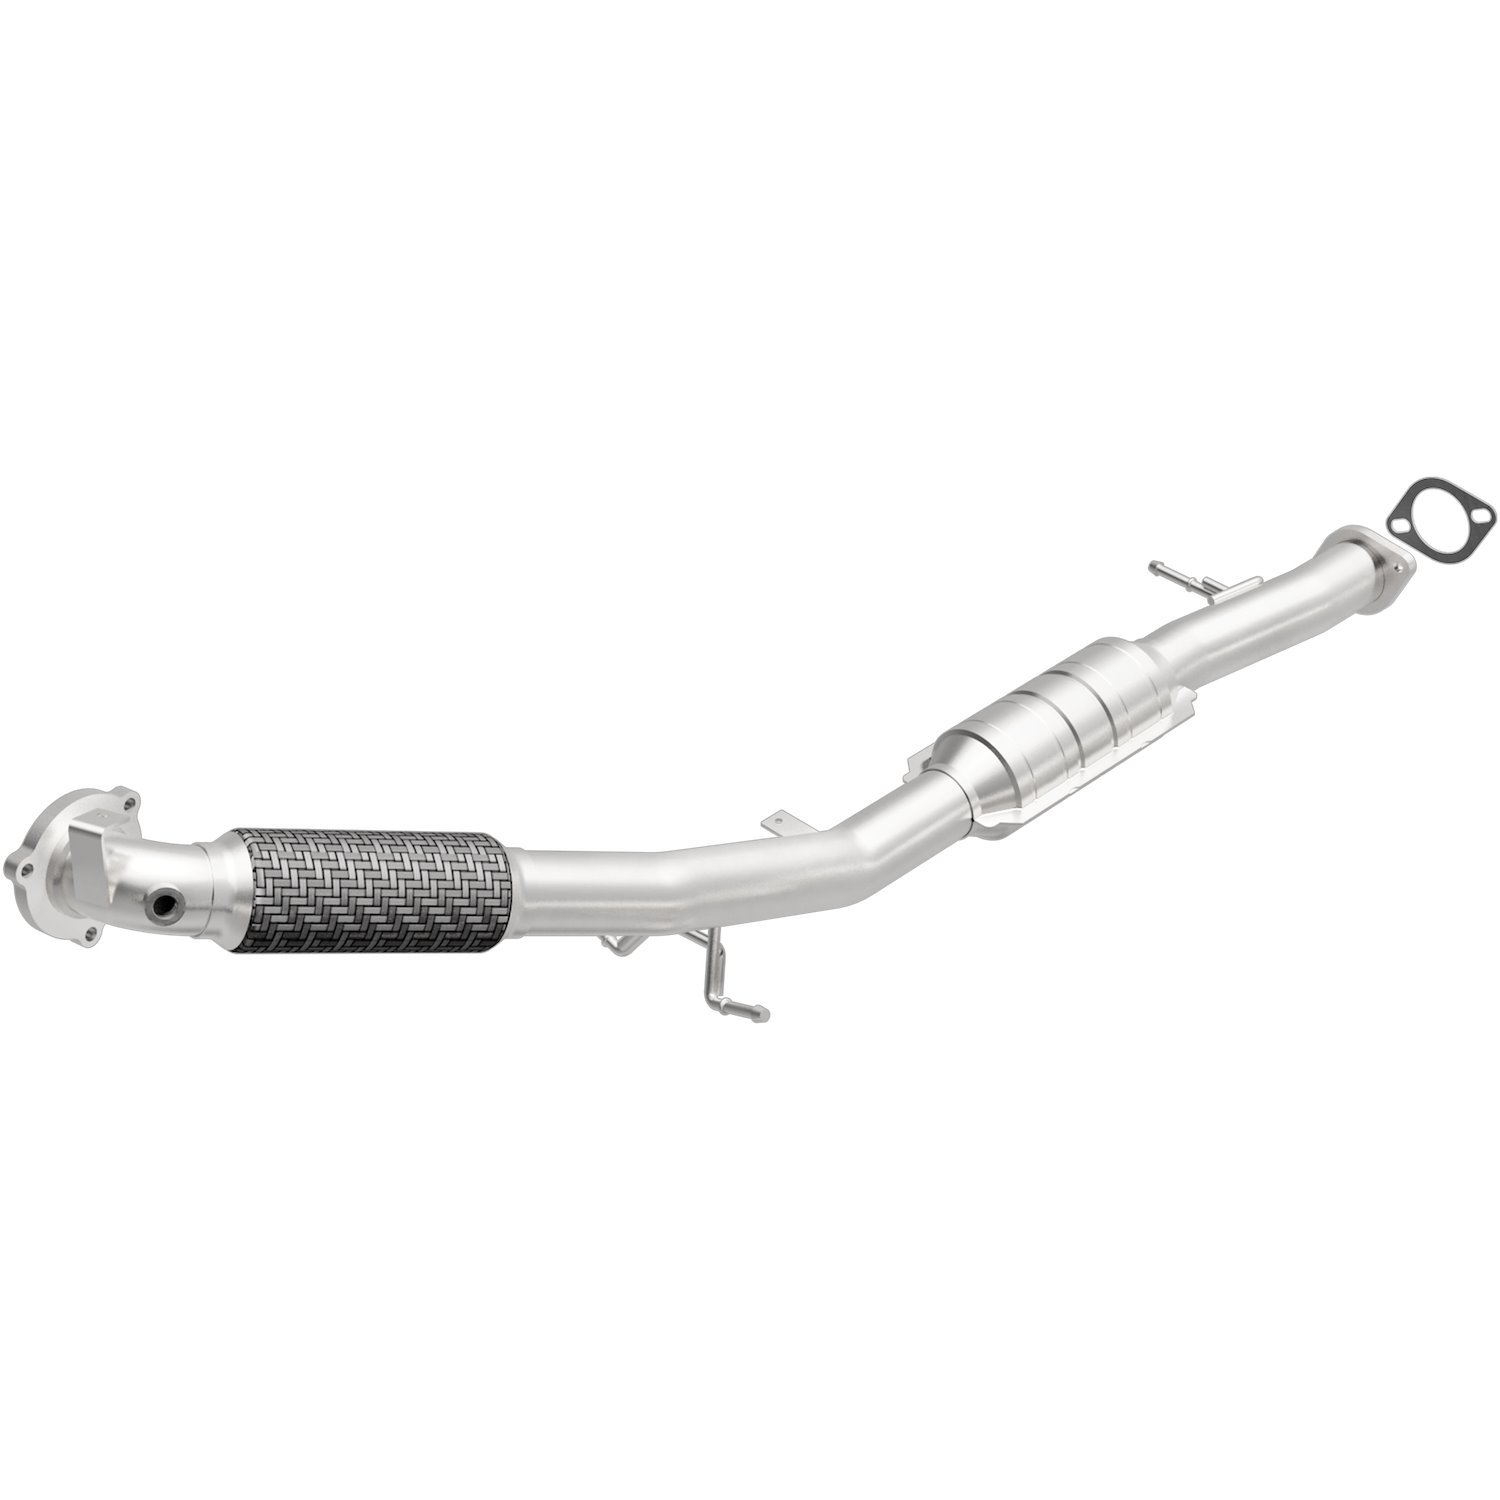 OEM Grade Federal / EPA Compliant Direct-Fit Catalytic Converter 49257